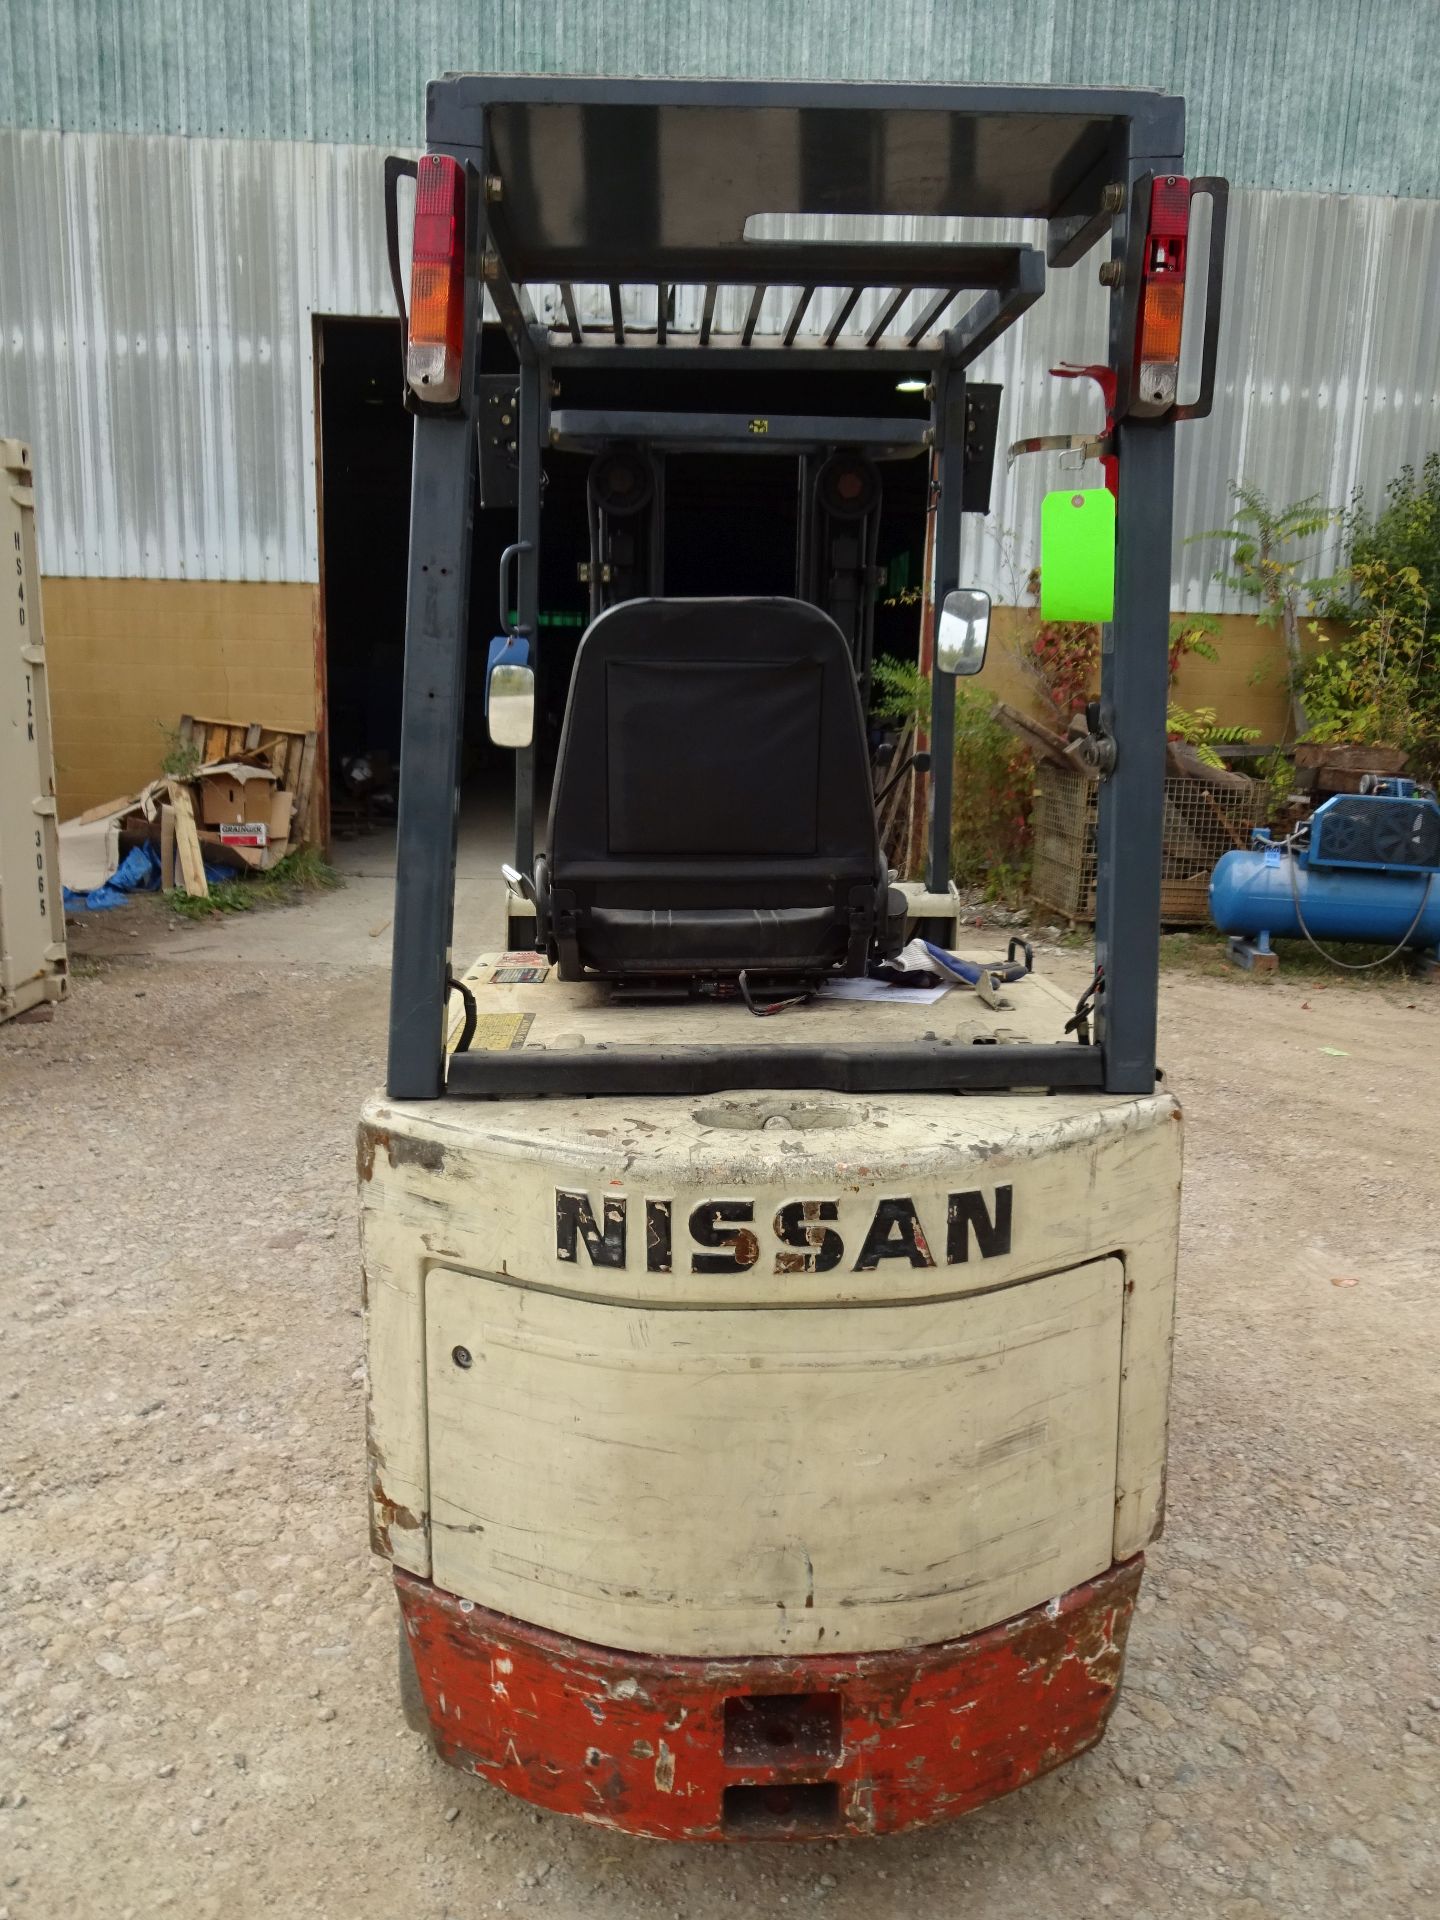 4,450 LB. NISSAN MODEL CWGP021255 ELECTRIC LIFT TRUCK; S/N 9E0536, 3-STAGE MAST, 178" LIFT HEIGHT, - Image 5 of 11